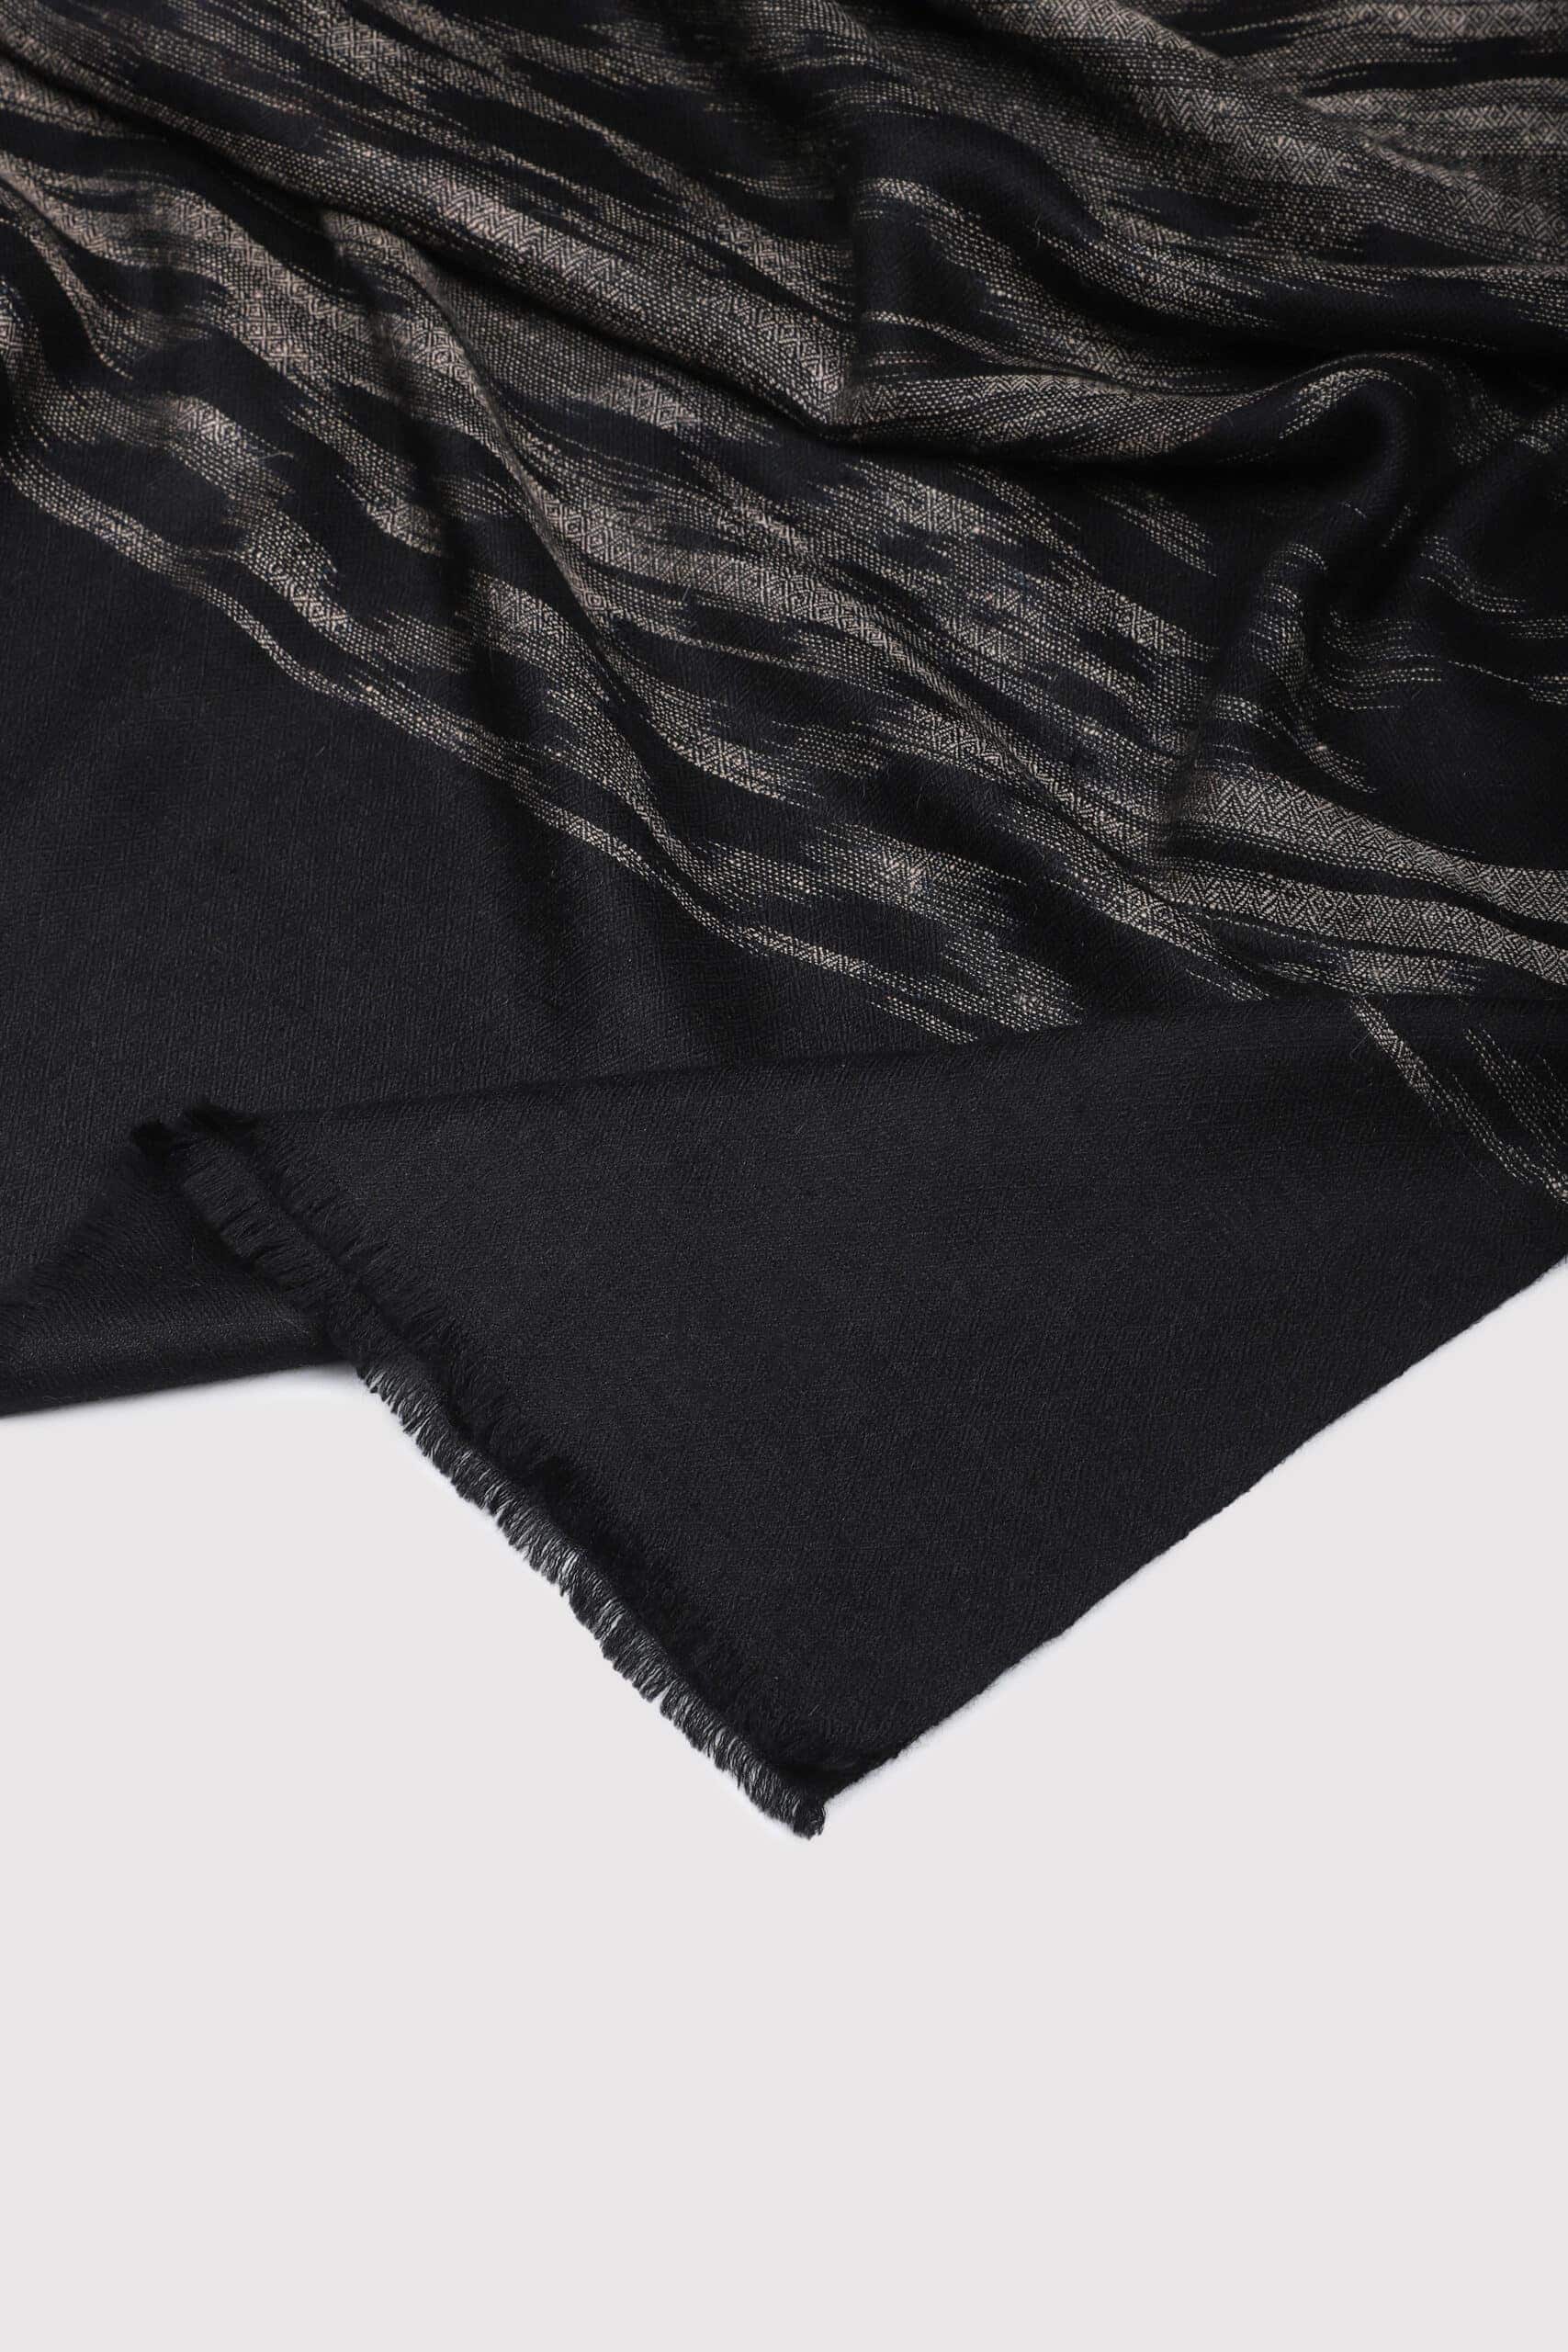 Black and grey colored Ikat shawl on a white background- Me & K